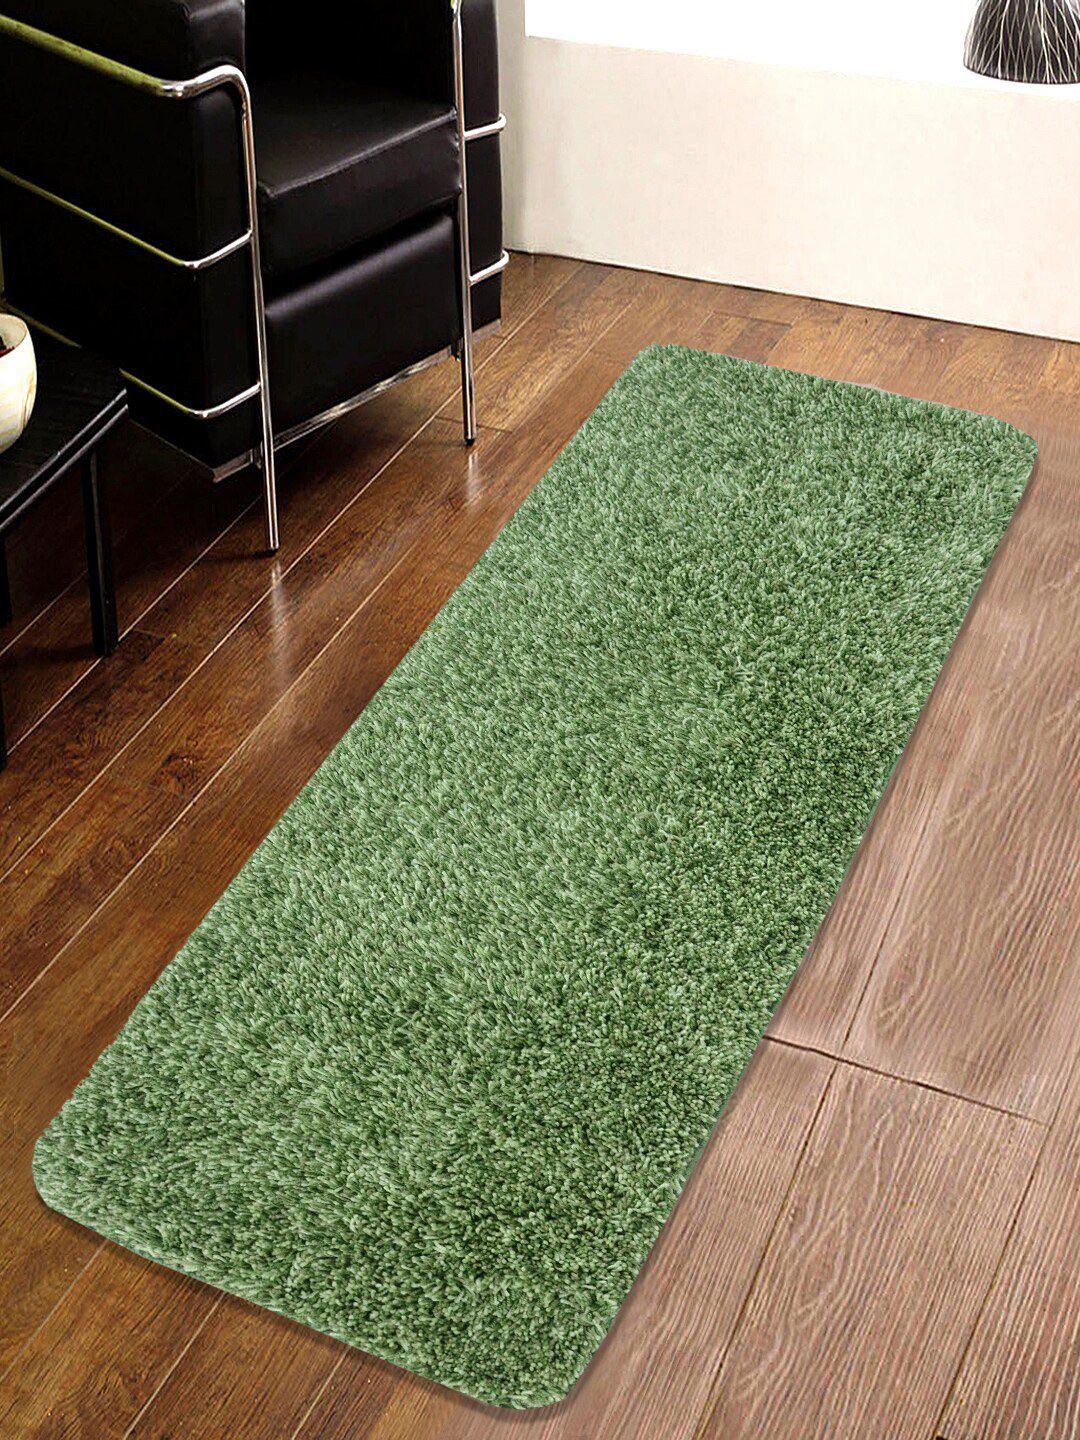 Saral Home Green Solid Antiskid Floor Runner Price in India